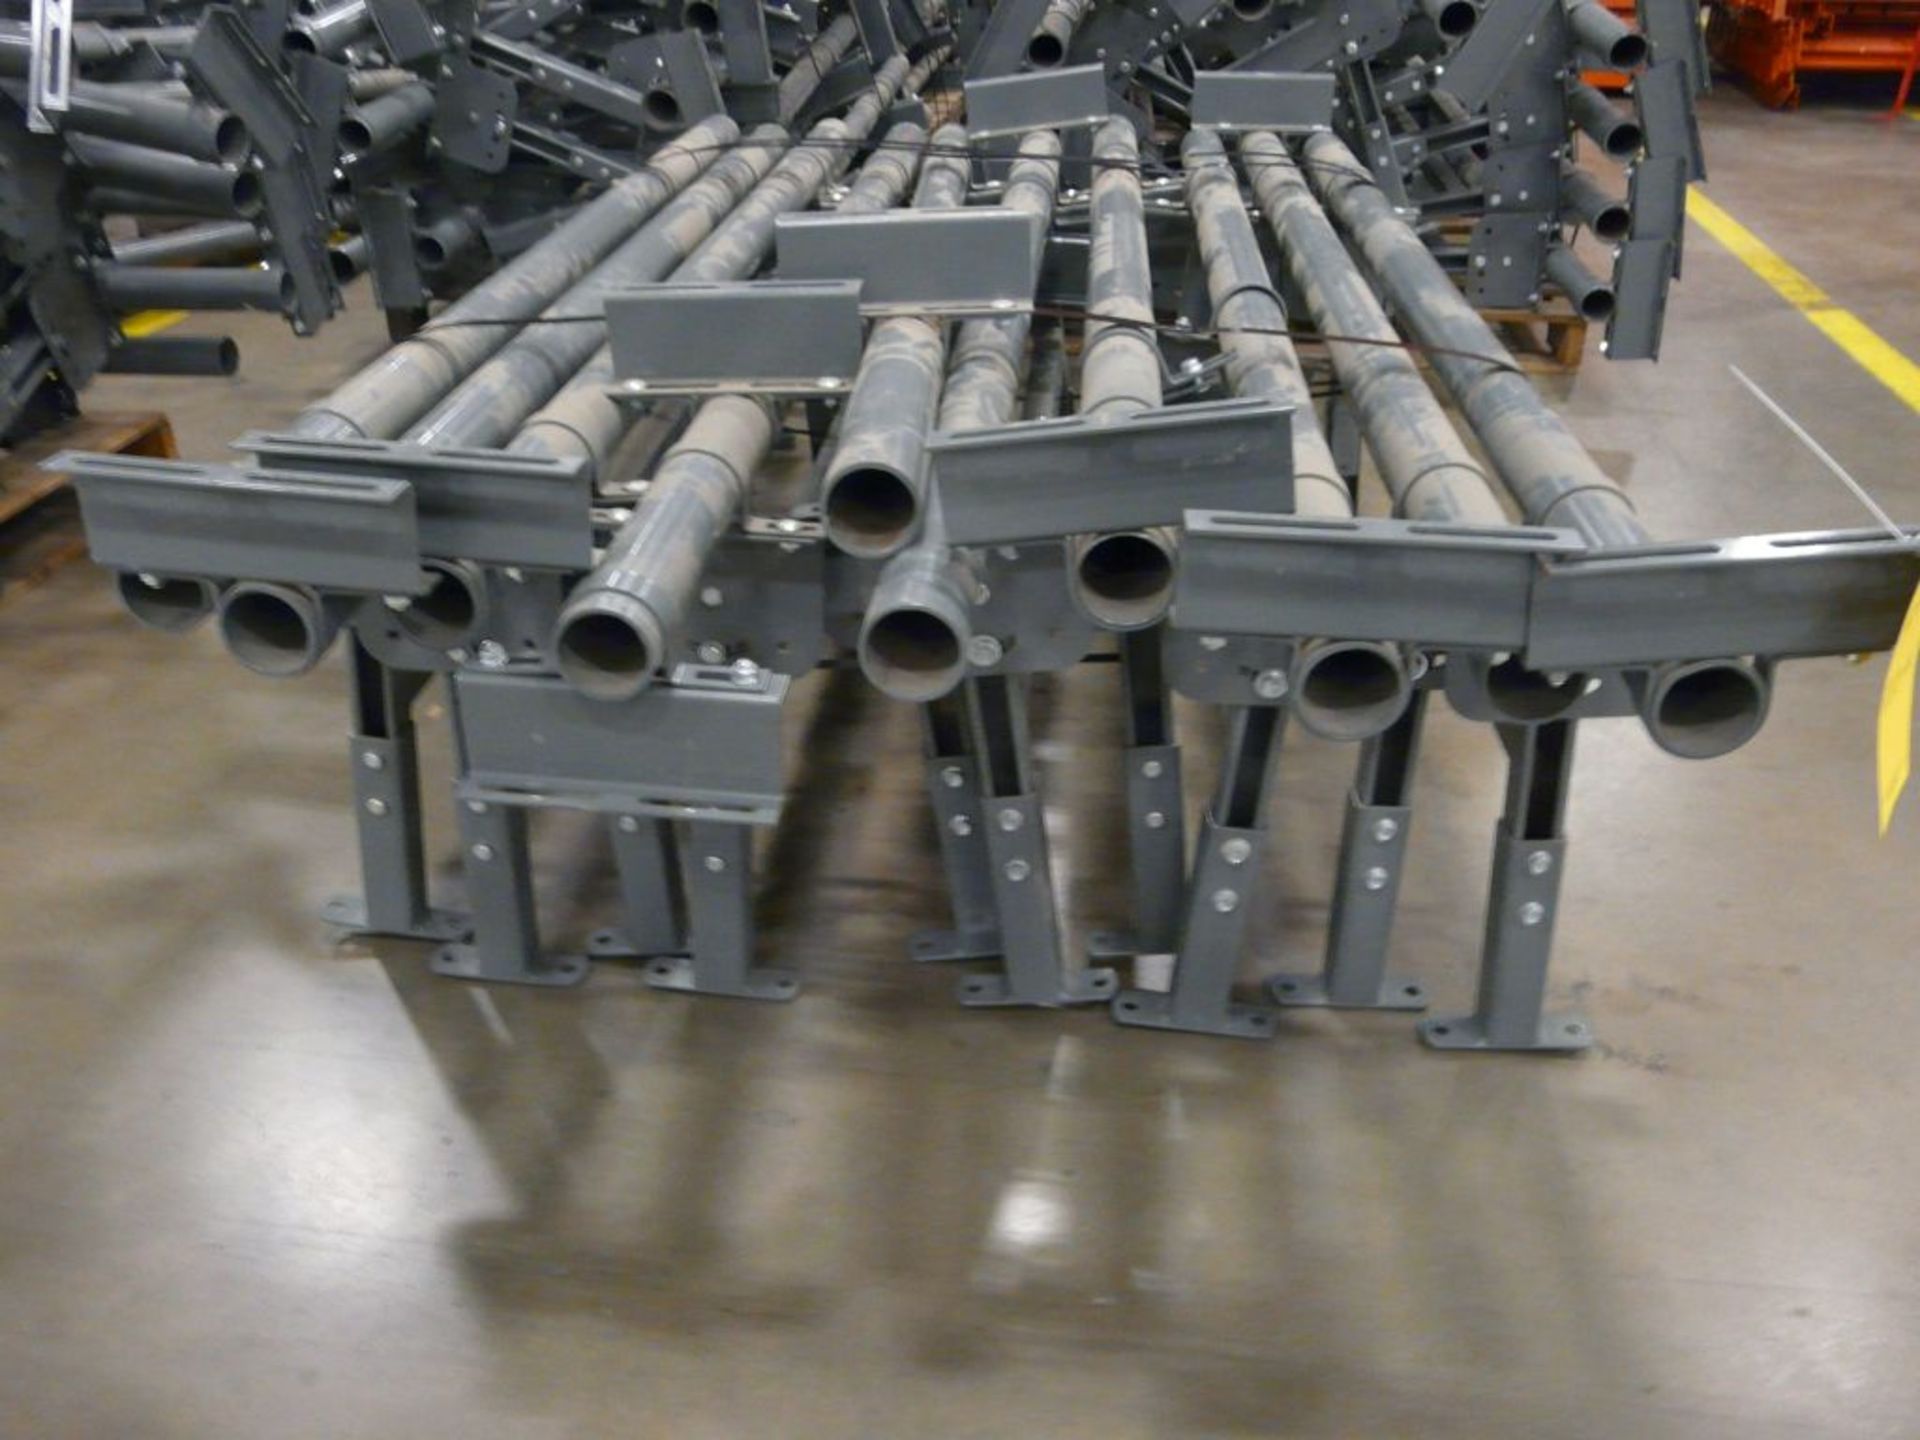 Lot of (10) USA Floor Supports - Brace: 71"L; Stand: 44"L x 19"H; Tag: 223858 - $30 Lot Loading Fee - Image 3 of 4